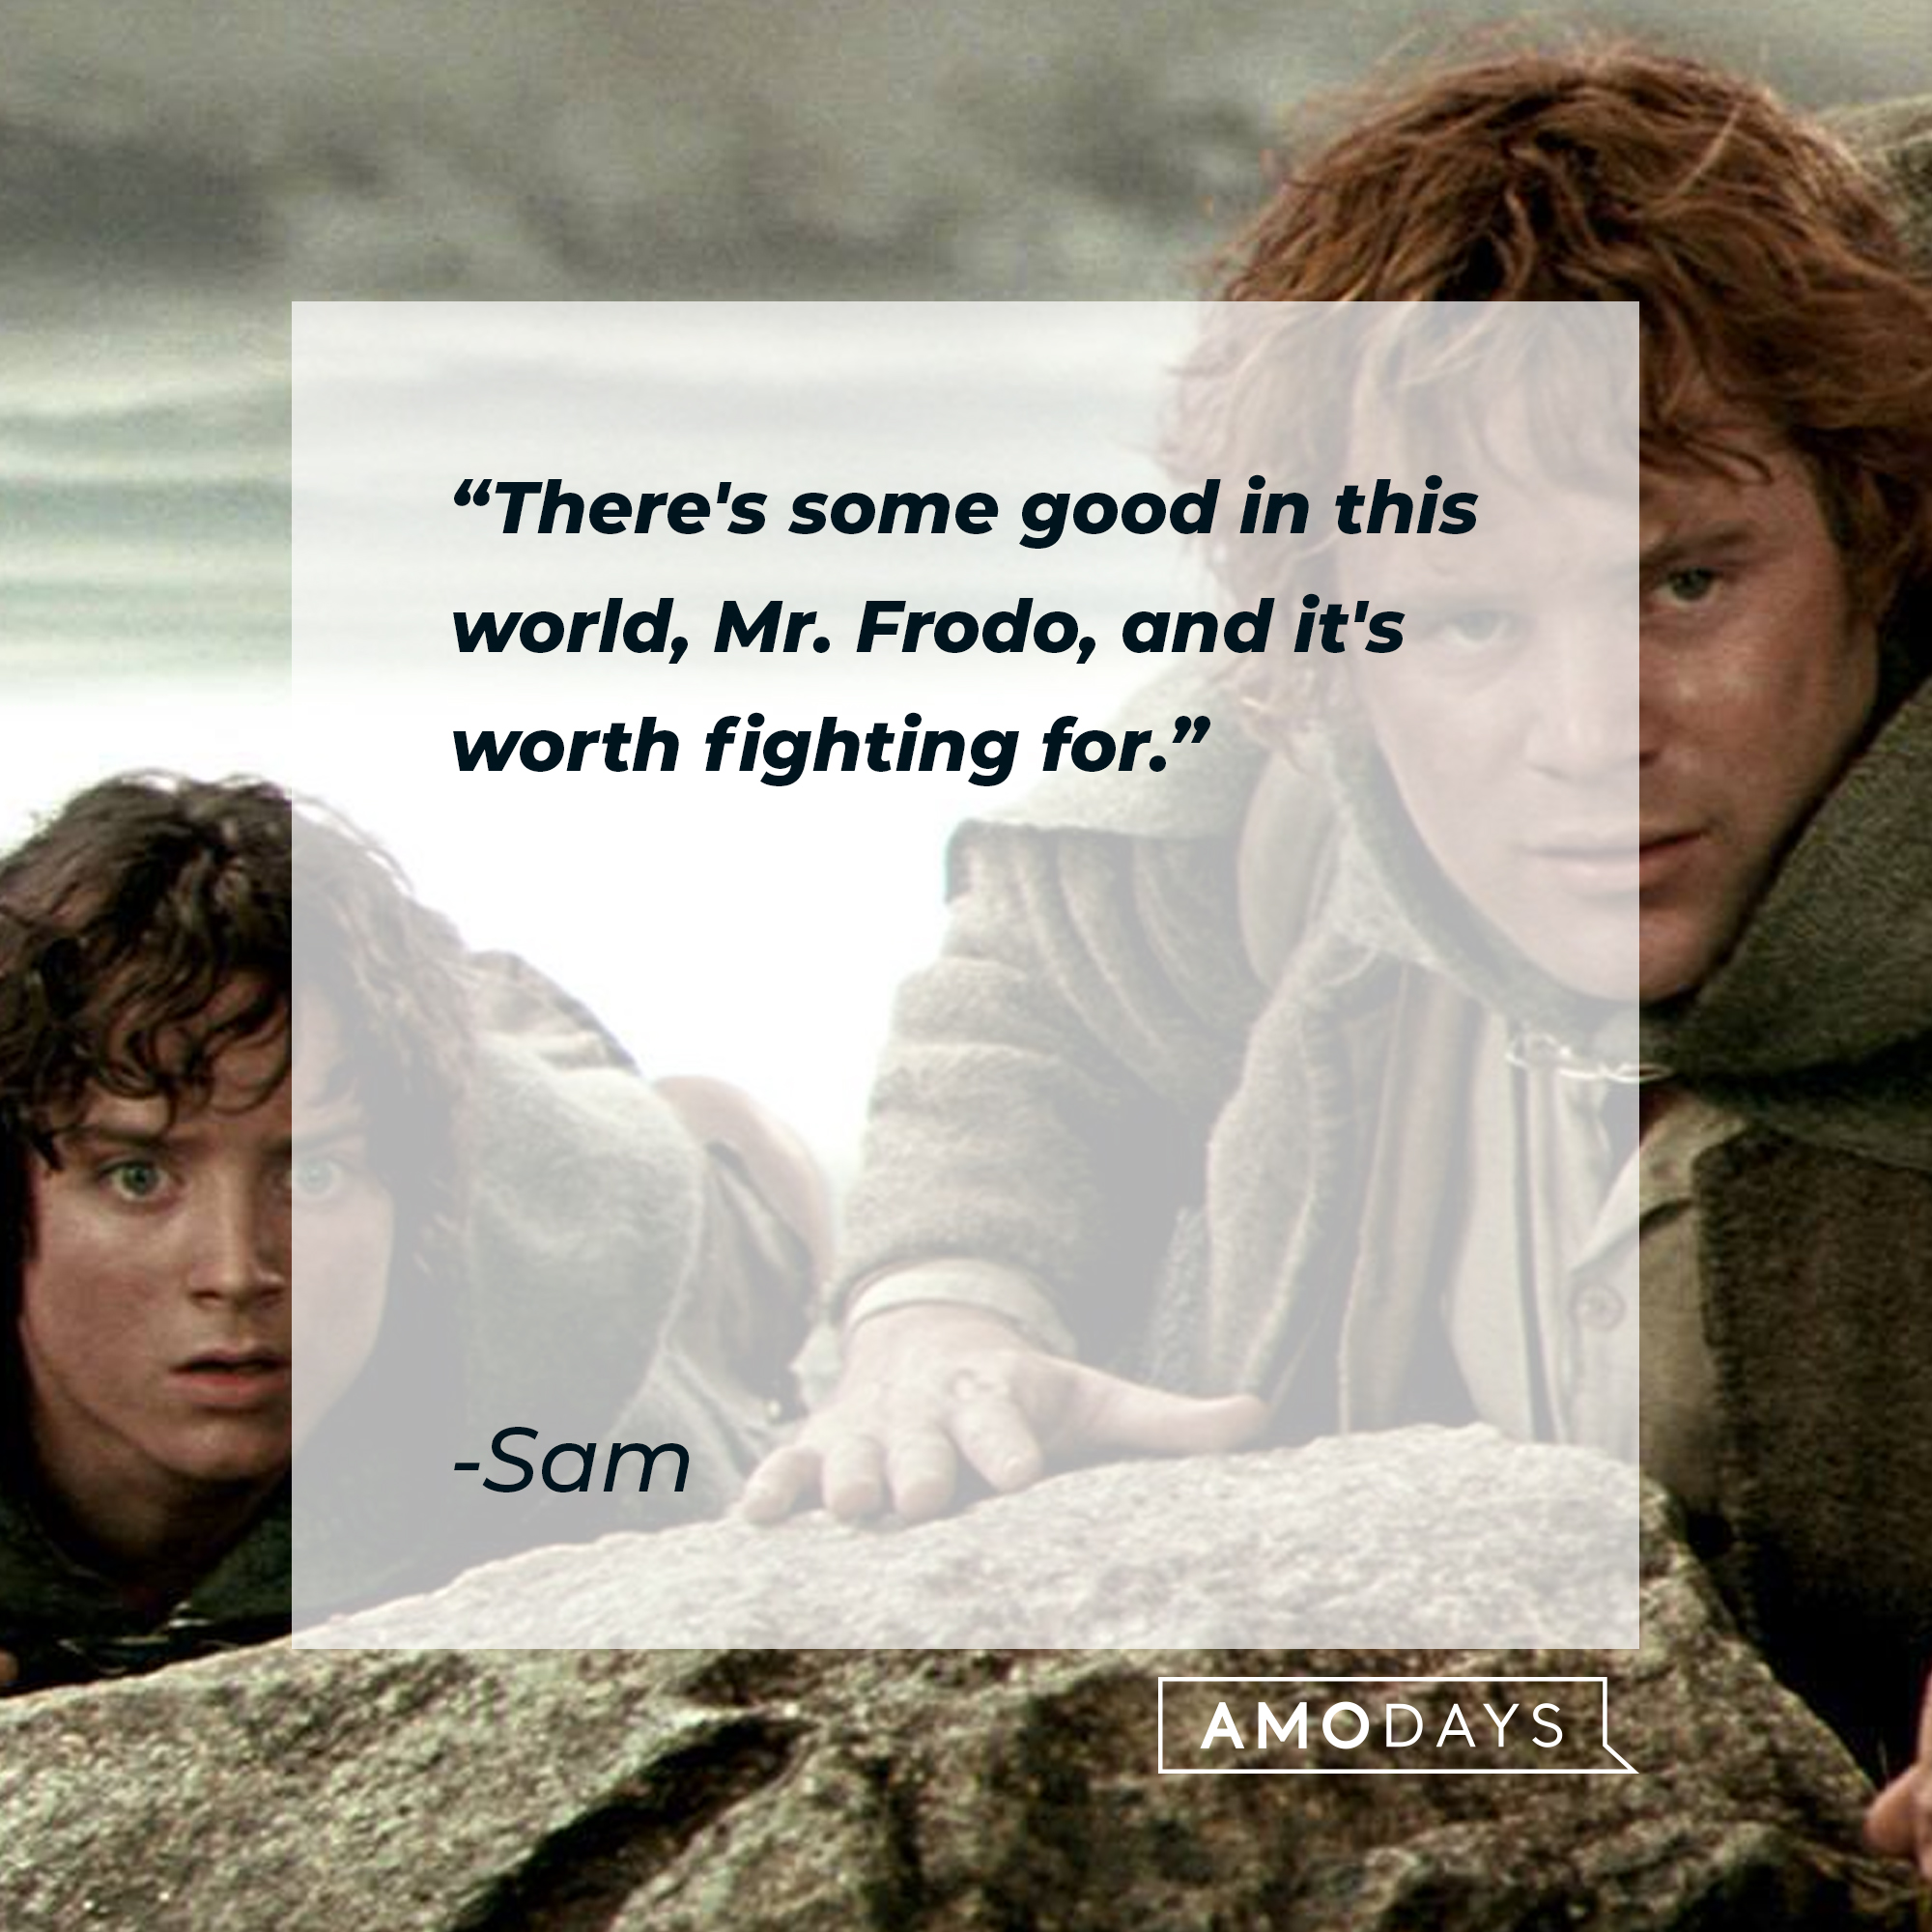 Sam's quote: “There's some good in this world, Mr. Frodo, and it's worth fighting for.” | Source: facebook.com/lordoftheringstrilogy